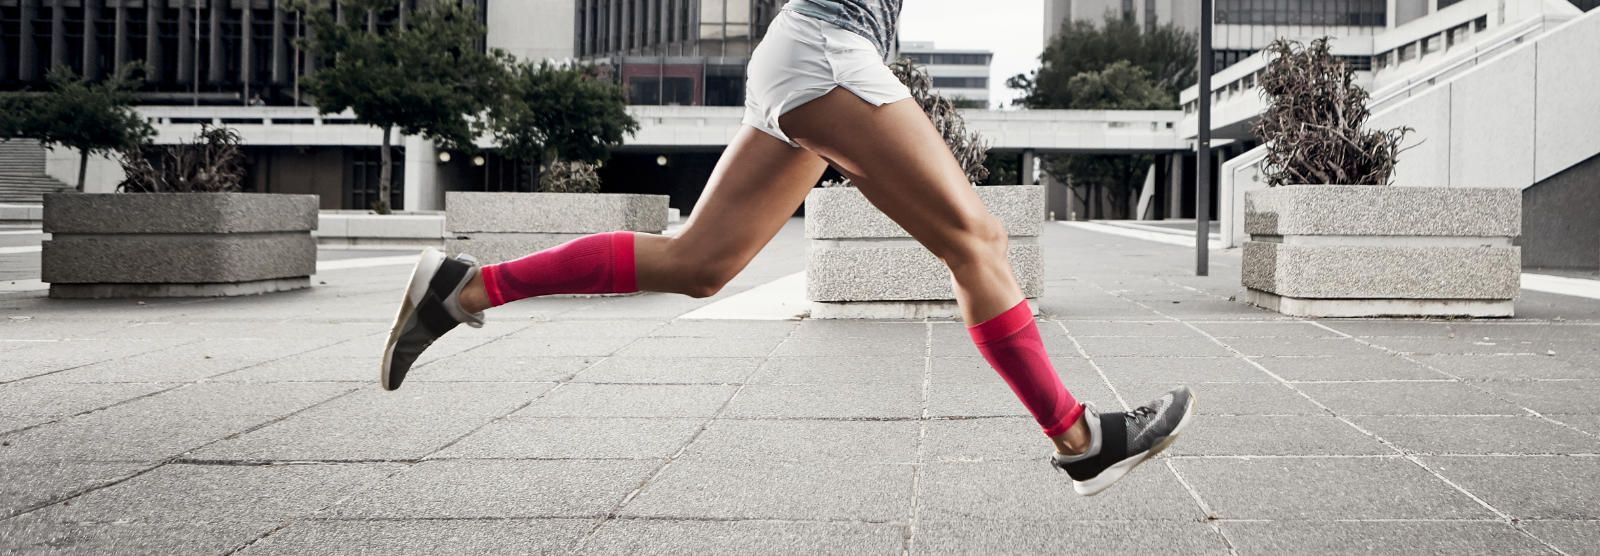 Woman with pink calves runs quickly and with legs in the air through an urban concrete desert